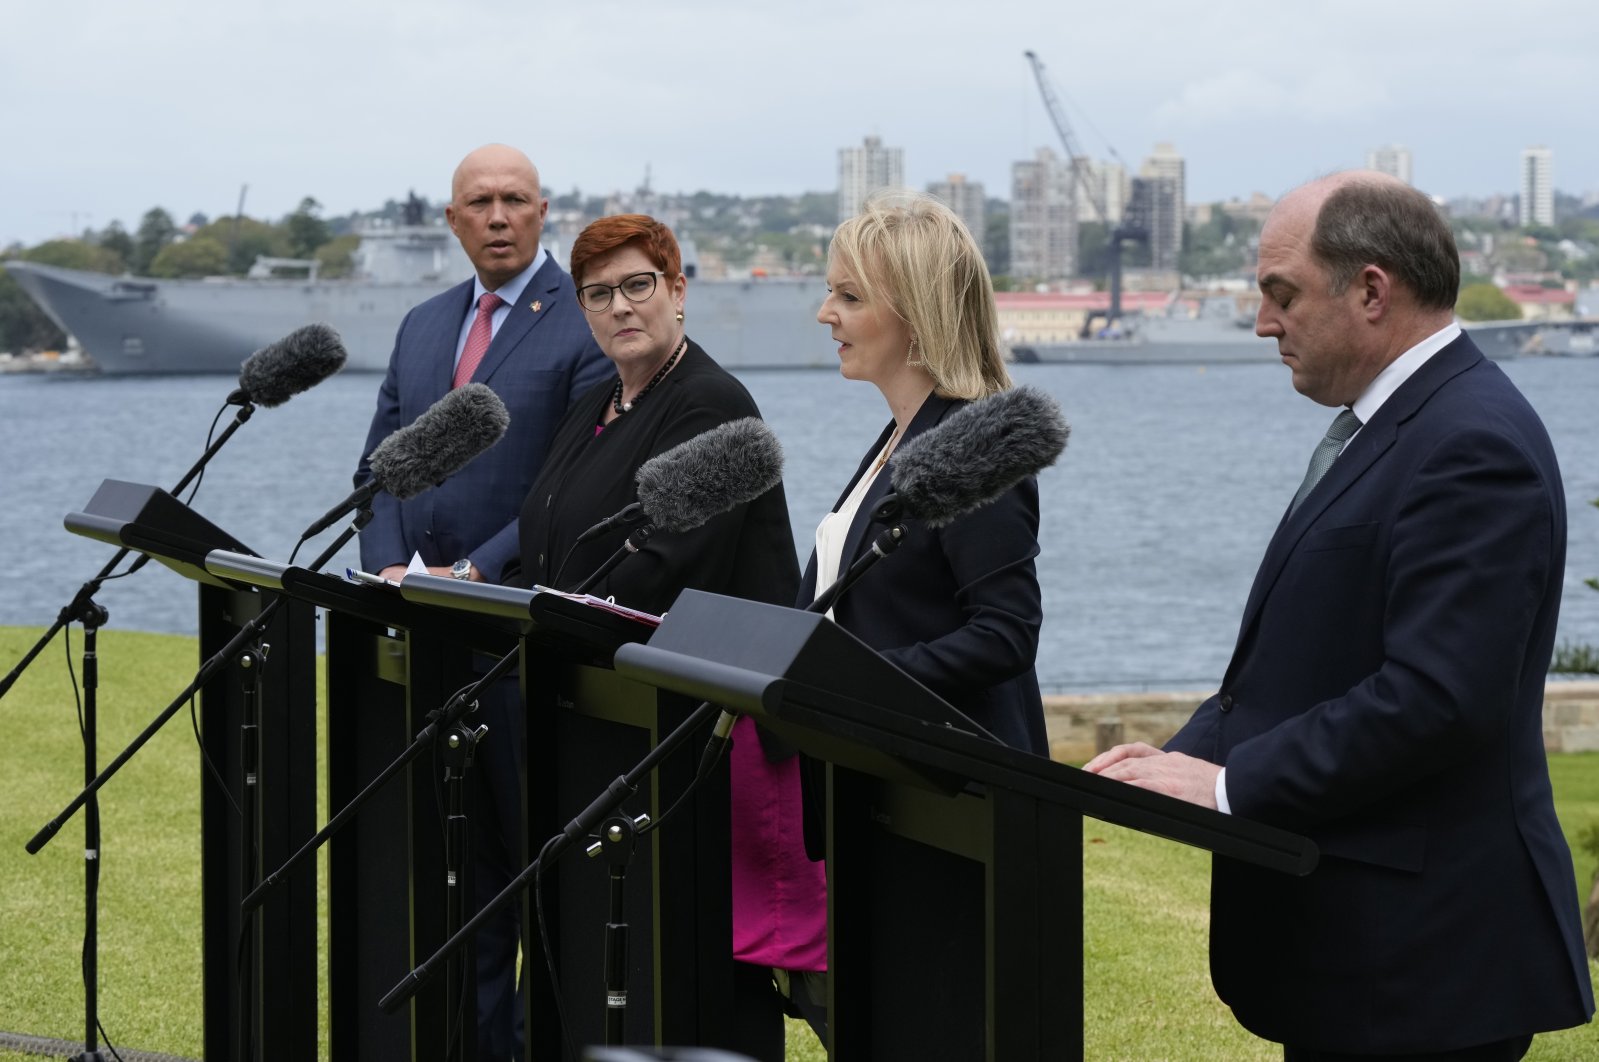 British Foreign Secretary Liz Truss (2R), British Defence Secretary Ben Wallace (R), Australian Foreign Minister Marise Payne and Australian Defence Minister Peter Dutton 9L) hold a press conference following Australia-United Kingdom Ministerial Consultations (AUKMIN) talks at Admiralty House, Sydney, Australia, Jan. 21, 2022. (AP Photo)